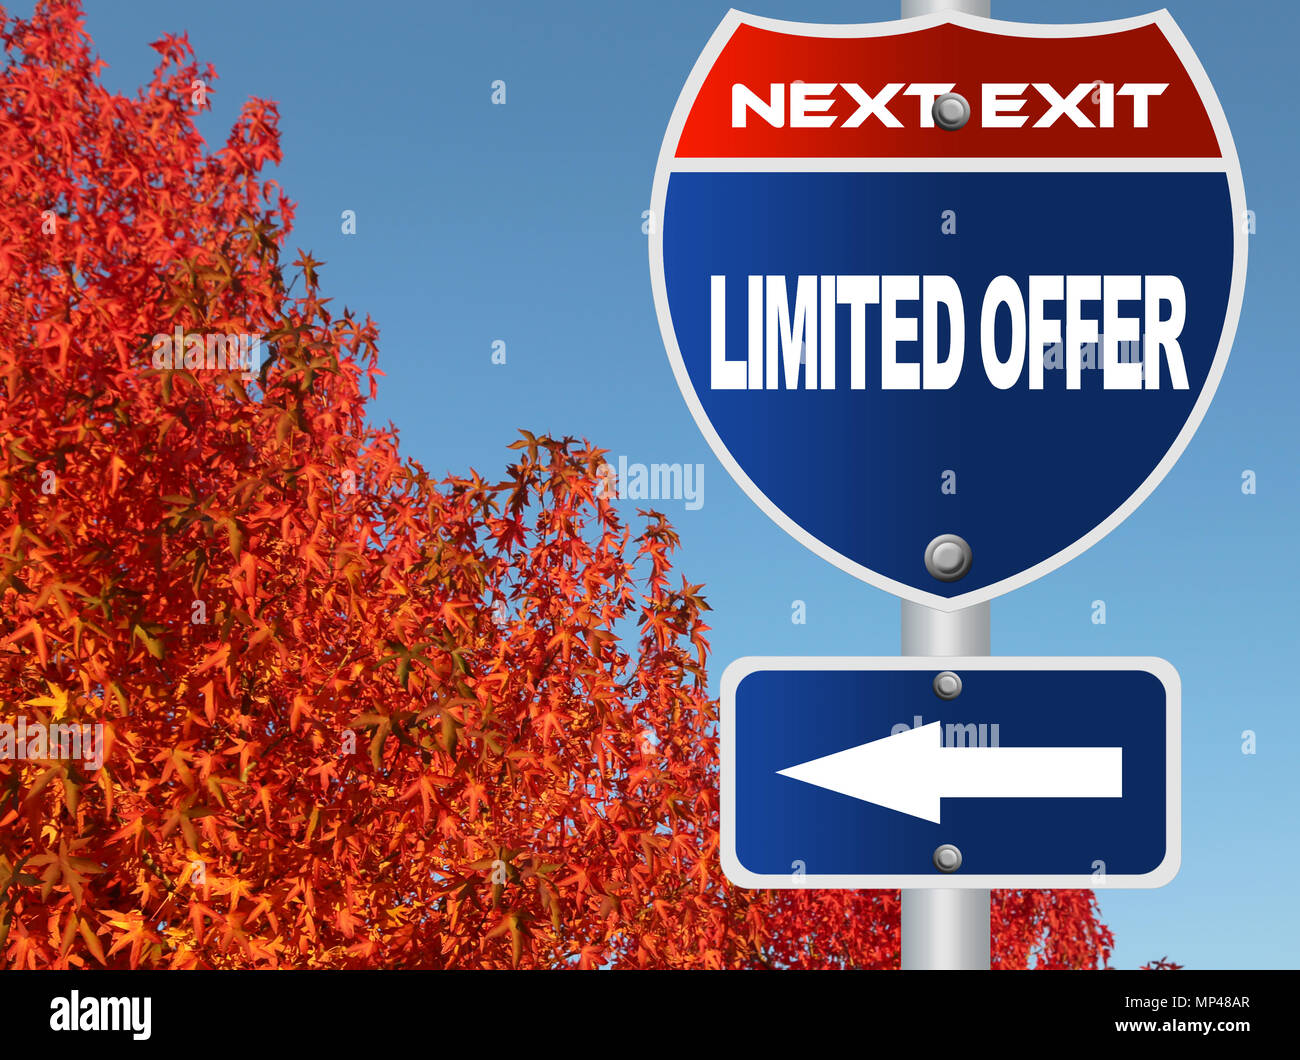 Limited offer road sign Stock Photo